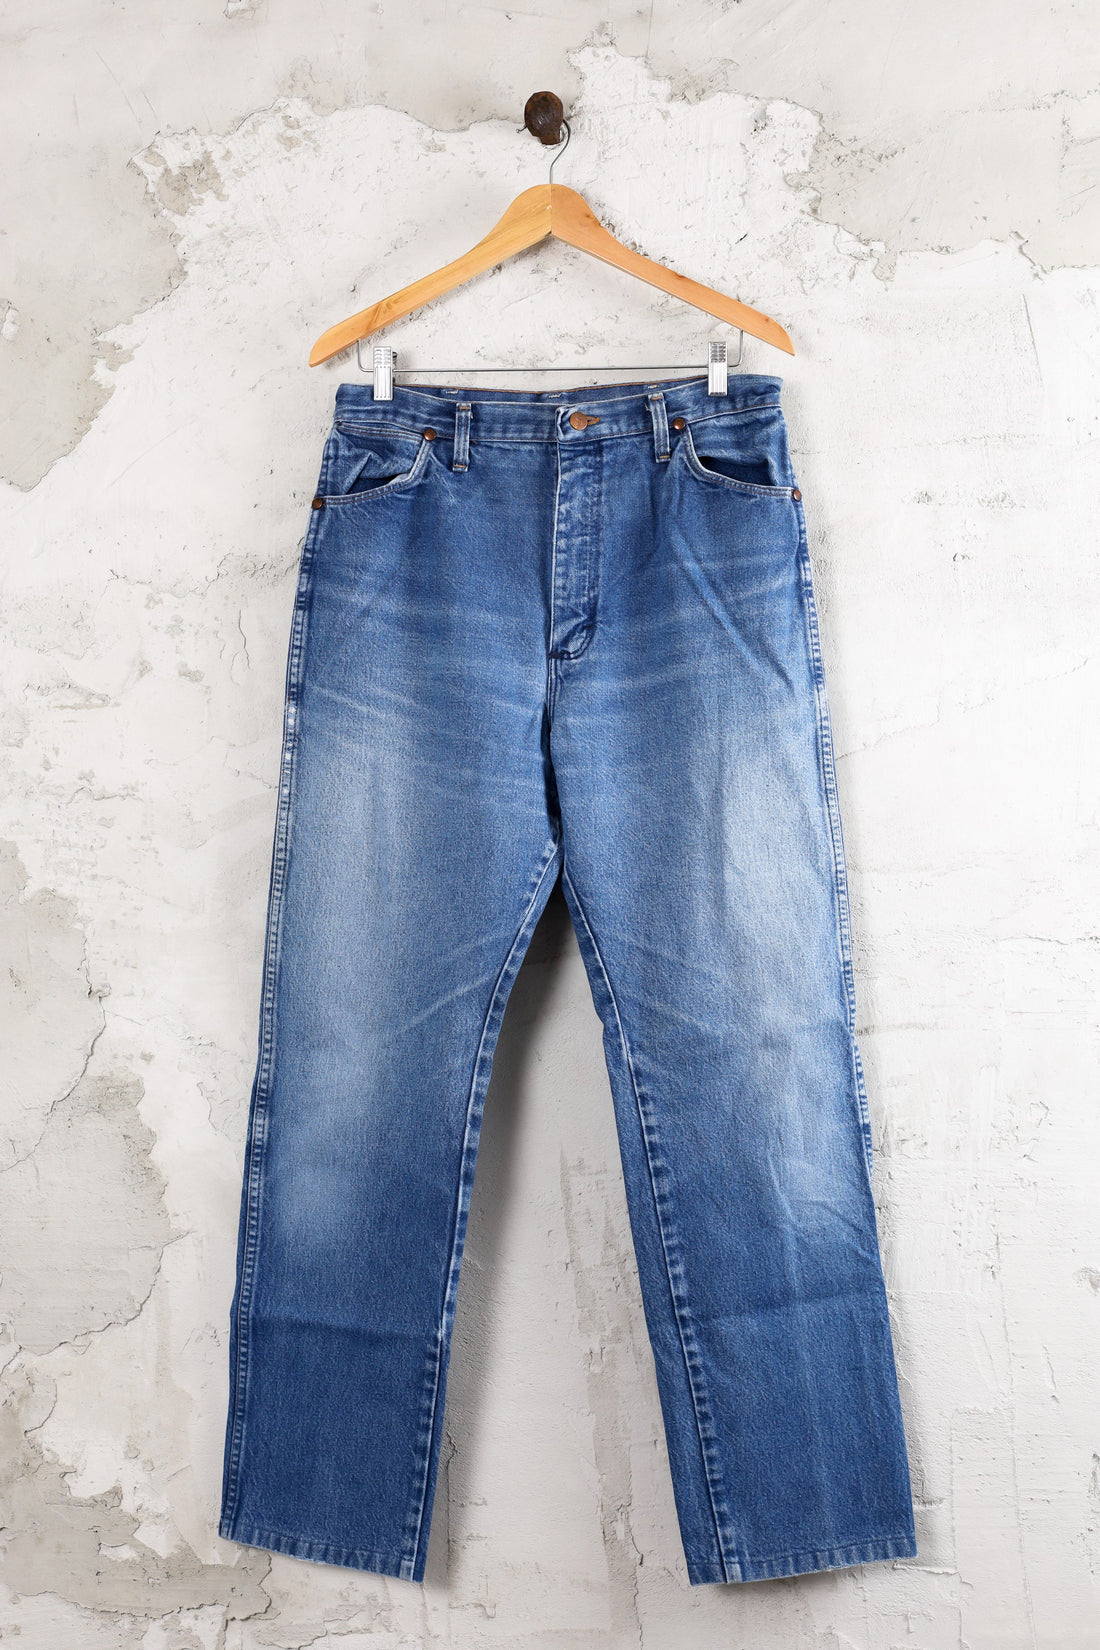 Used Thrift Made In USA Wrangler Jeans | Medium Wash | Men's / Women's |  32-38 – The Green Closet